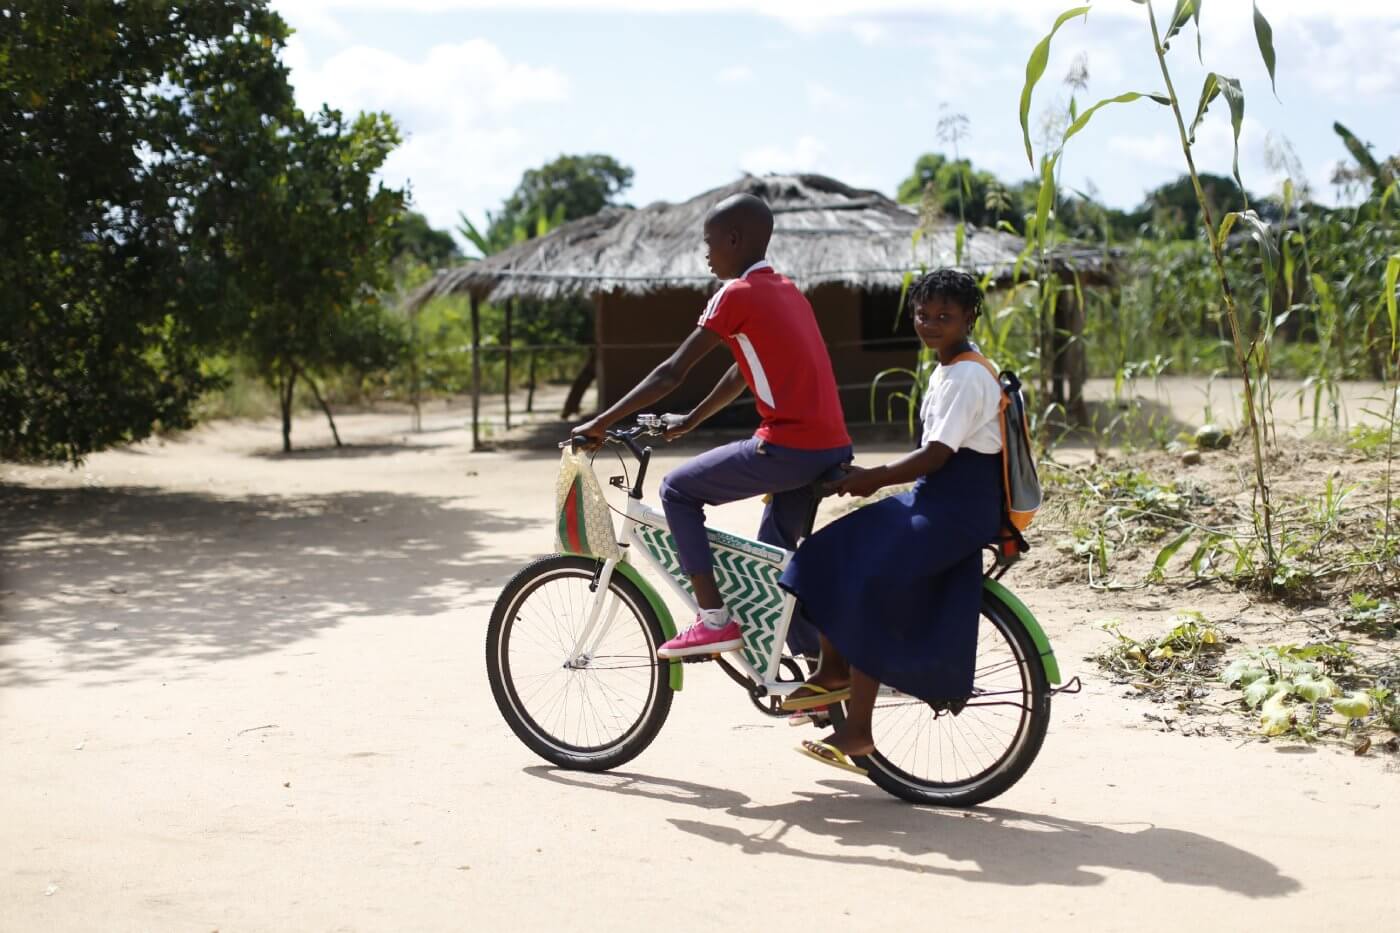 A photo-realistic image of two boys wearing red and blue t-shirts, riding on a green Mozambikes bicycle with a white frame and green handlebars on a dirt road in a rural setting. In the background, there is a thatched roof hut and trees, with a blue sky and white clouds above.